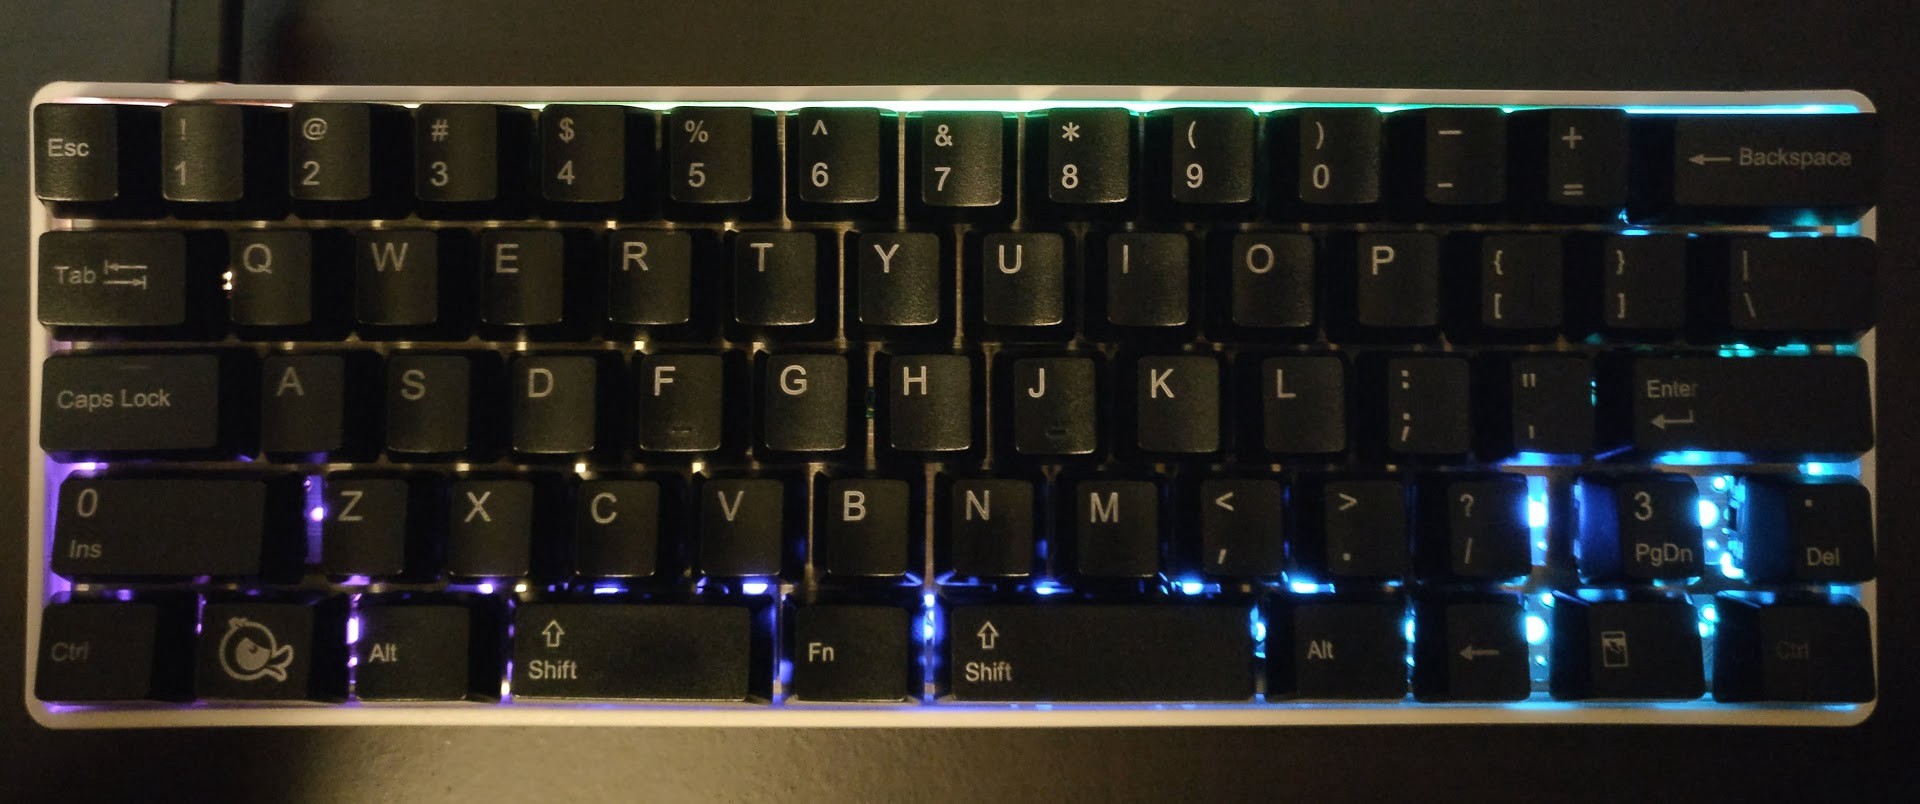 The "finished" product using temporary keycaps